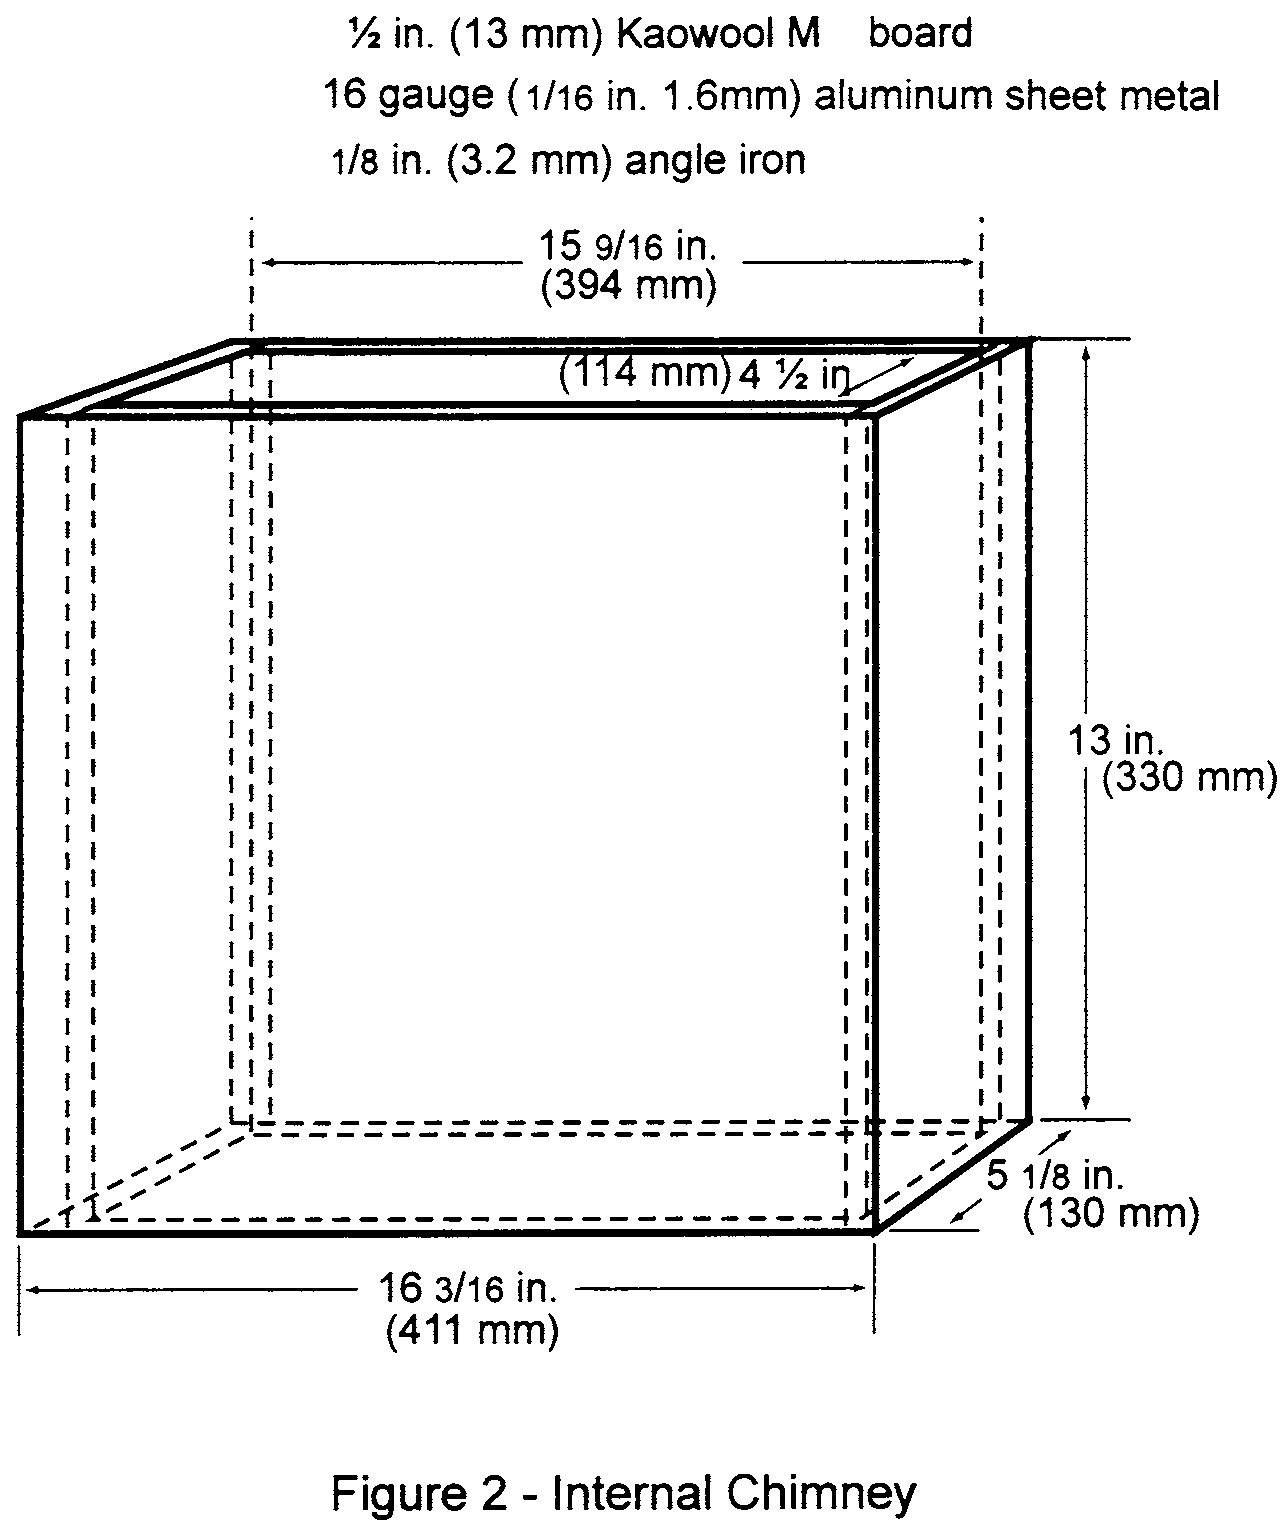 Graphic of (1) Radiant panel test chamber. Conduct tests in a radiant panel test chamber (see figure 1 above). Place the test chamber under an exhaust hood to facilitate clearing the chamber of smoke after each test. The radiant panel test chamber must be an enclosure 55 inches (1397 mm) long by 19.5 (495 mm) deep by 28 (710 mm) to 30 inches (maximum) (762 mm) above the test specimen. Insulate the sides, ends, and top with a fibrous ceramic insulation, such as Kaowool M TM board. On the front side, provide a 52 by 12-inch (1321 by 305 mm) draft-free, high-temperature, glass window for viewing the sample during testing. Place a door below the window to provide access to the movable specimen platform holder. The bottom of the test chamber must be a sliding steel platform that has provision for securing the test specimen holder in a fixed and level position. The chamber must have an internal chimney with exterior dimensions of 5.1 inches (129 mm) wide, by 16.2 inches (411 mm) deep by 13 inches (330 mm) high at the opposite end of the chamber from the radiant energy source. The interior dimensions must be 4.5 inches (114 mm) wide by 15.6 inches (395 mm) deep. The chimney must extend to the top of the chamber (see figure 2).